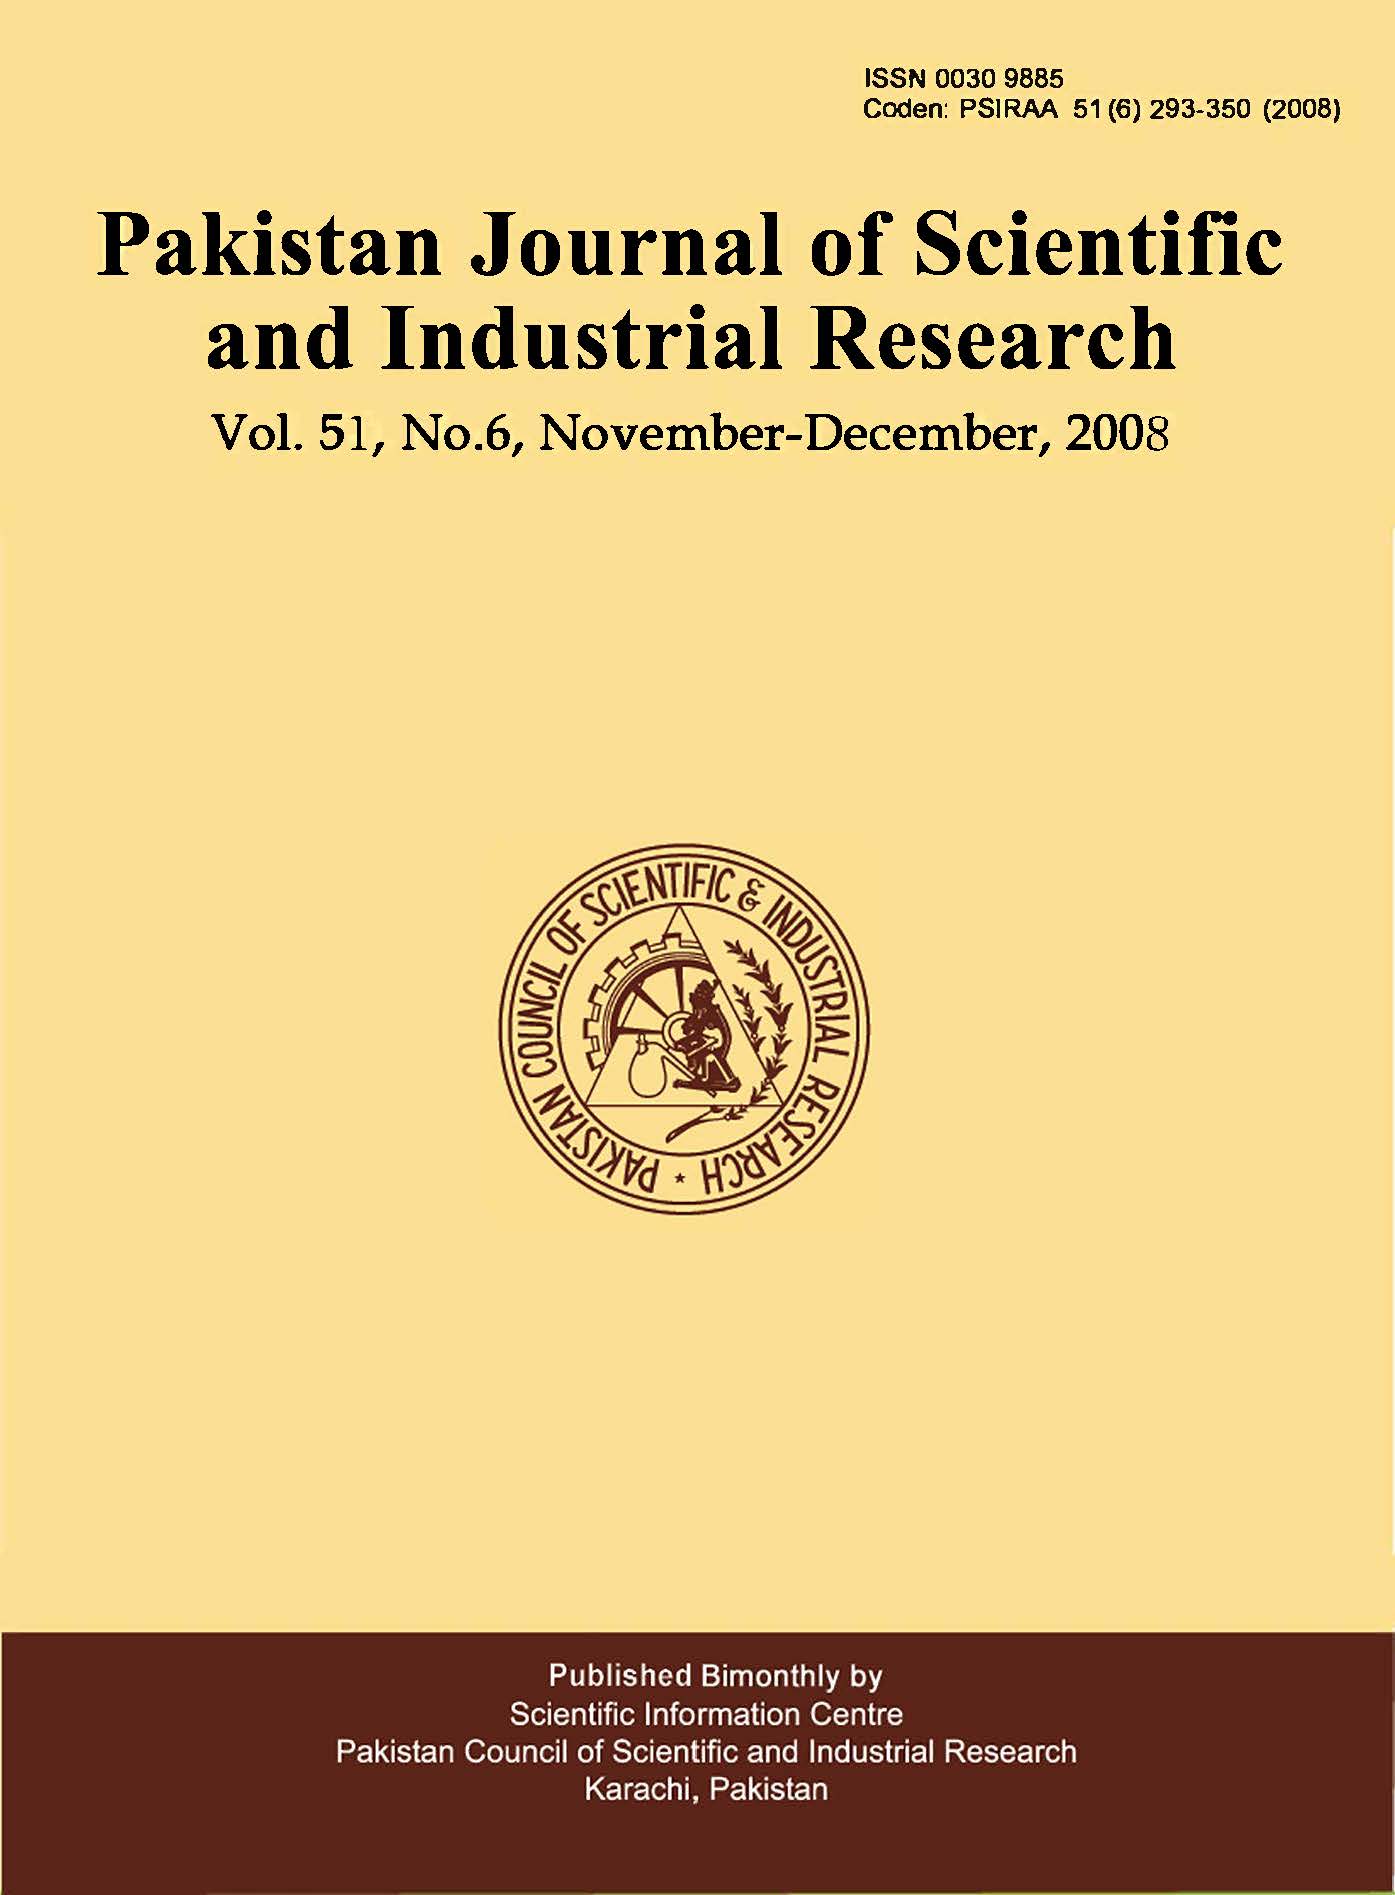 					View Vol. 51 No. 6 (2008): Pakistan Journal of Scientific and Industrial Research
				